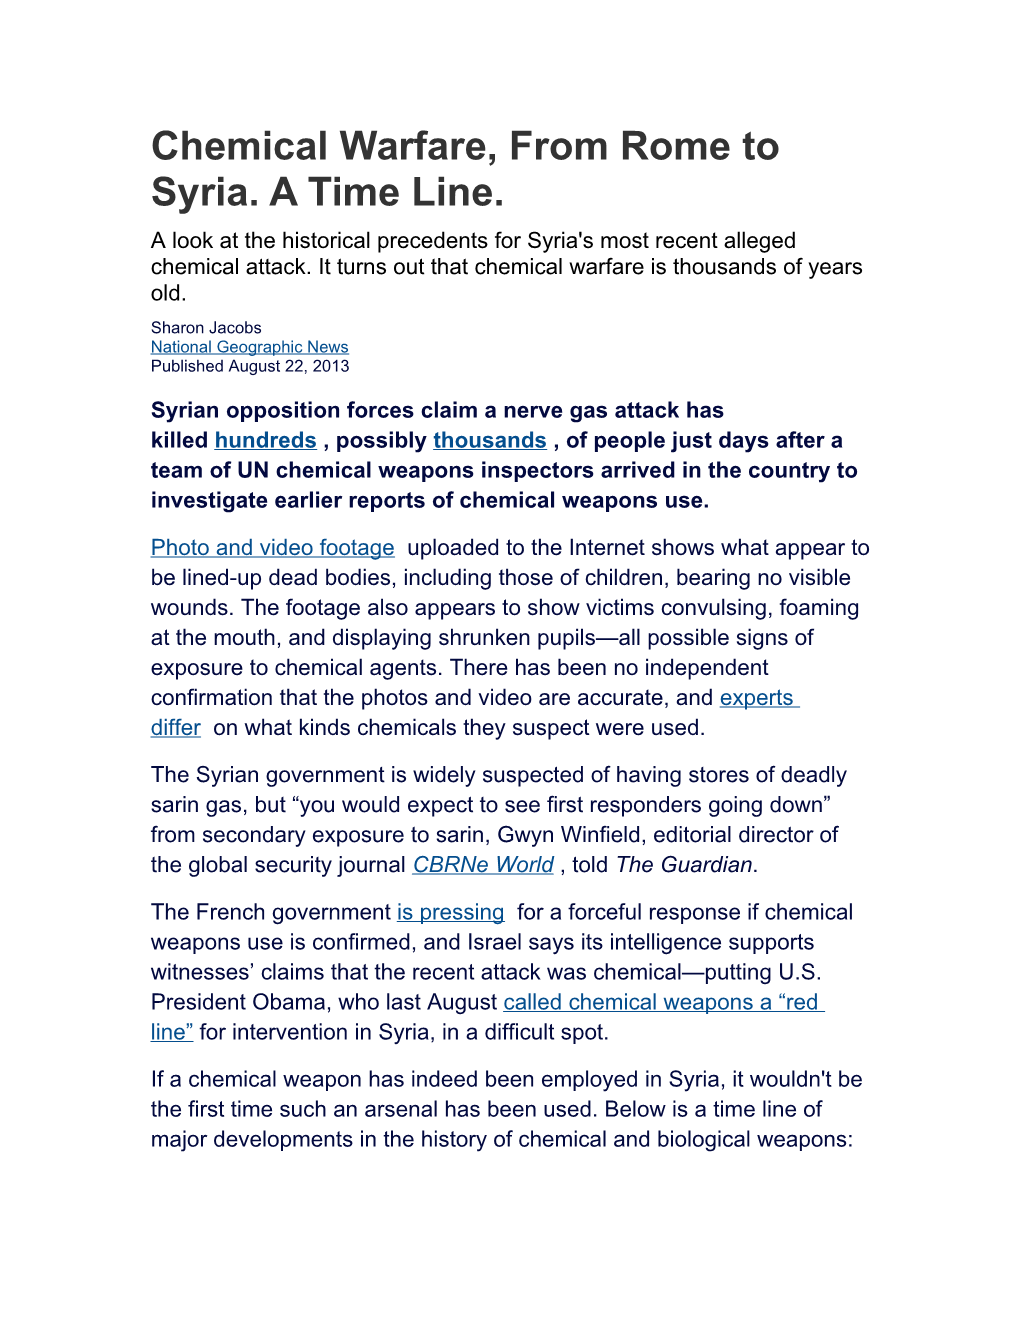 Chemical Warfare, from Rome to Syria.A Time Line